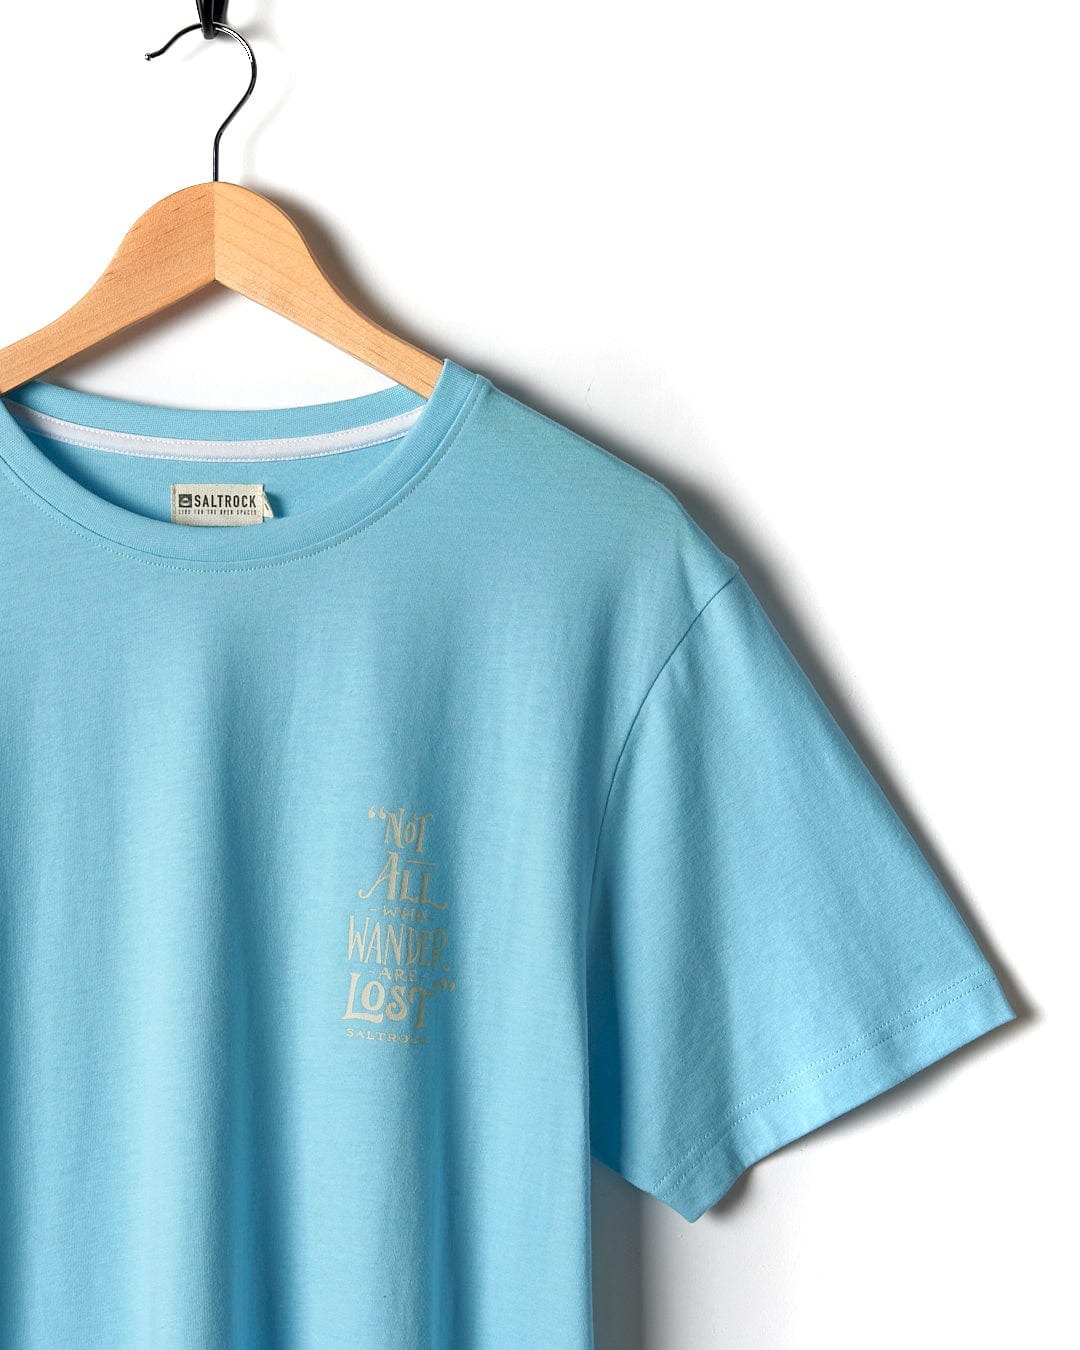 A Lost Ships - Mens Short Sleeve T-Shirt in turquoise with a gold logo, perfect for branding by Saltrock.